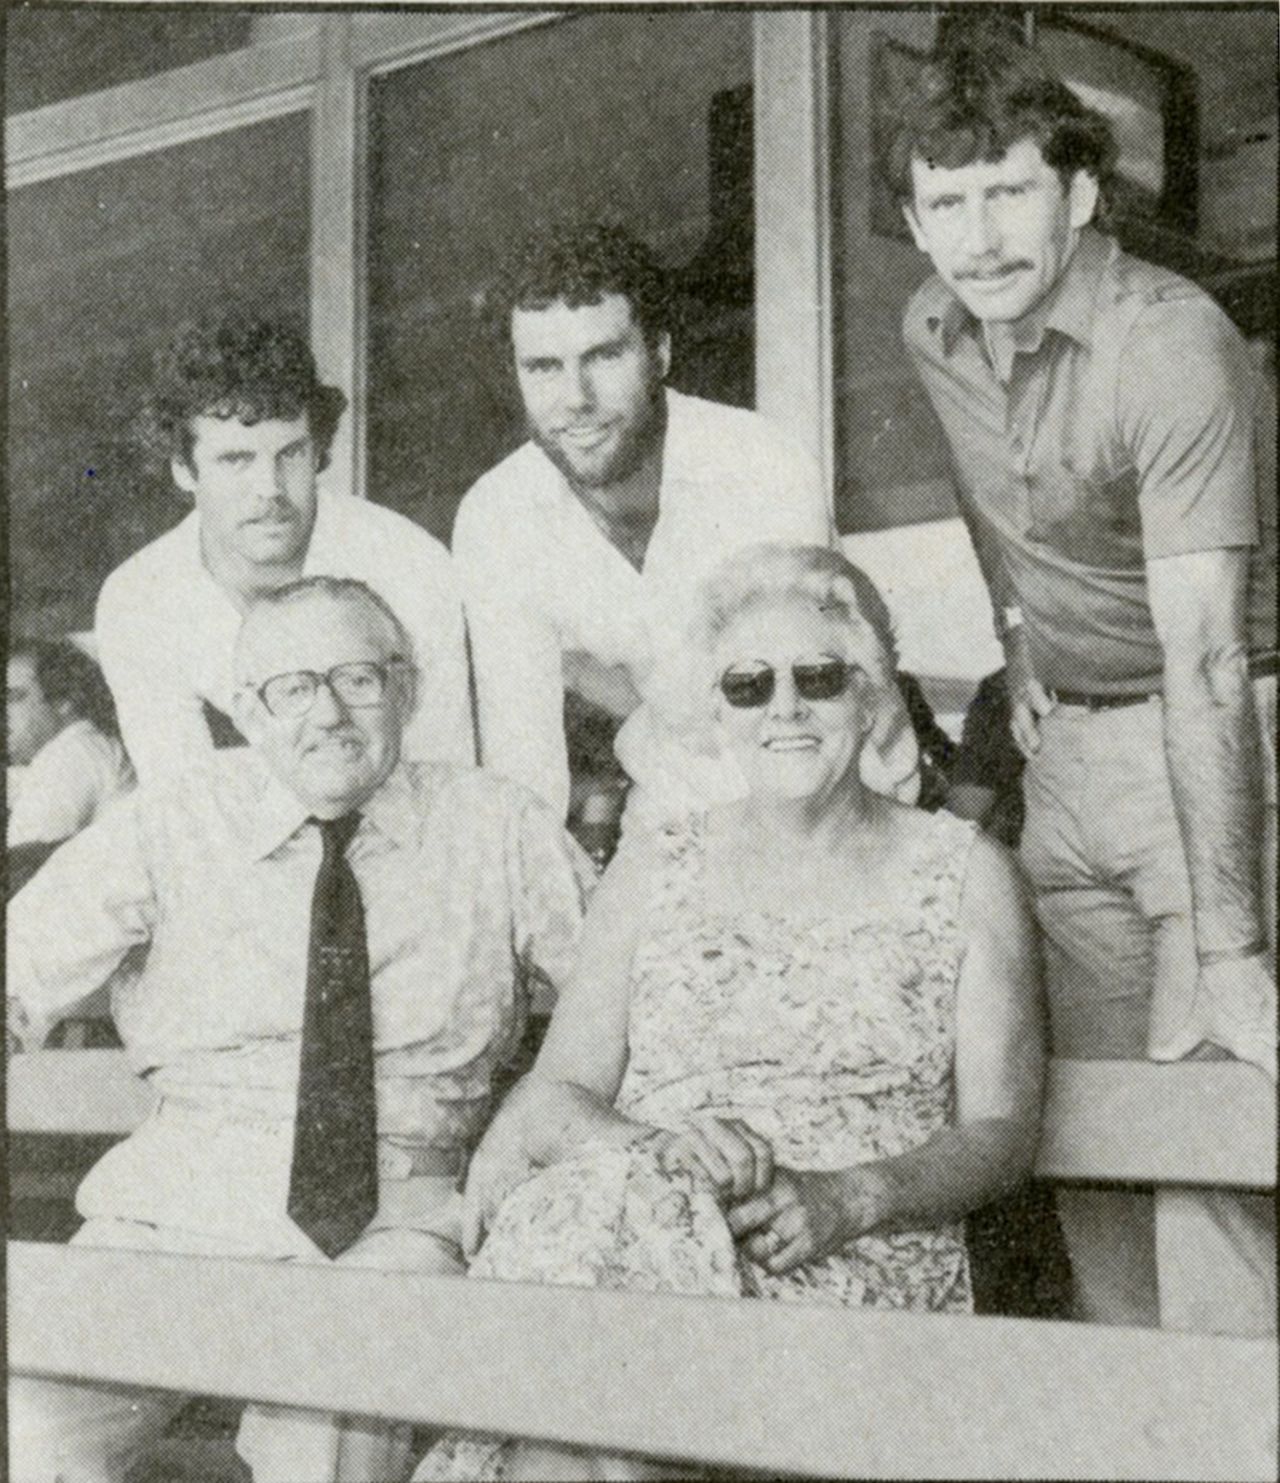 The Chappell brothers with their parents, Martin and Jeanne, December 1980